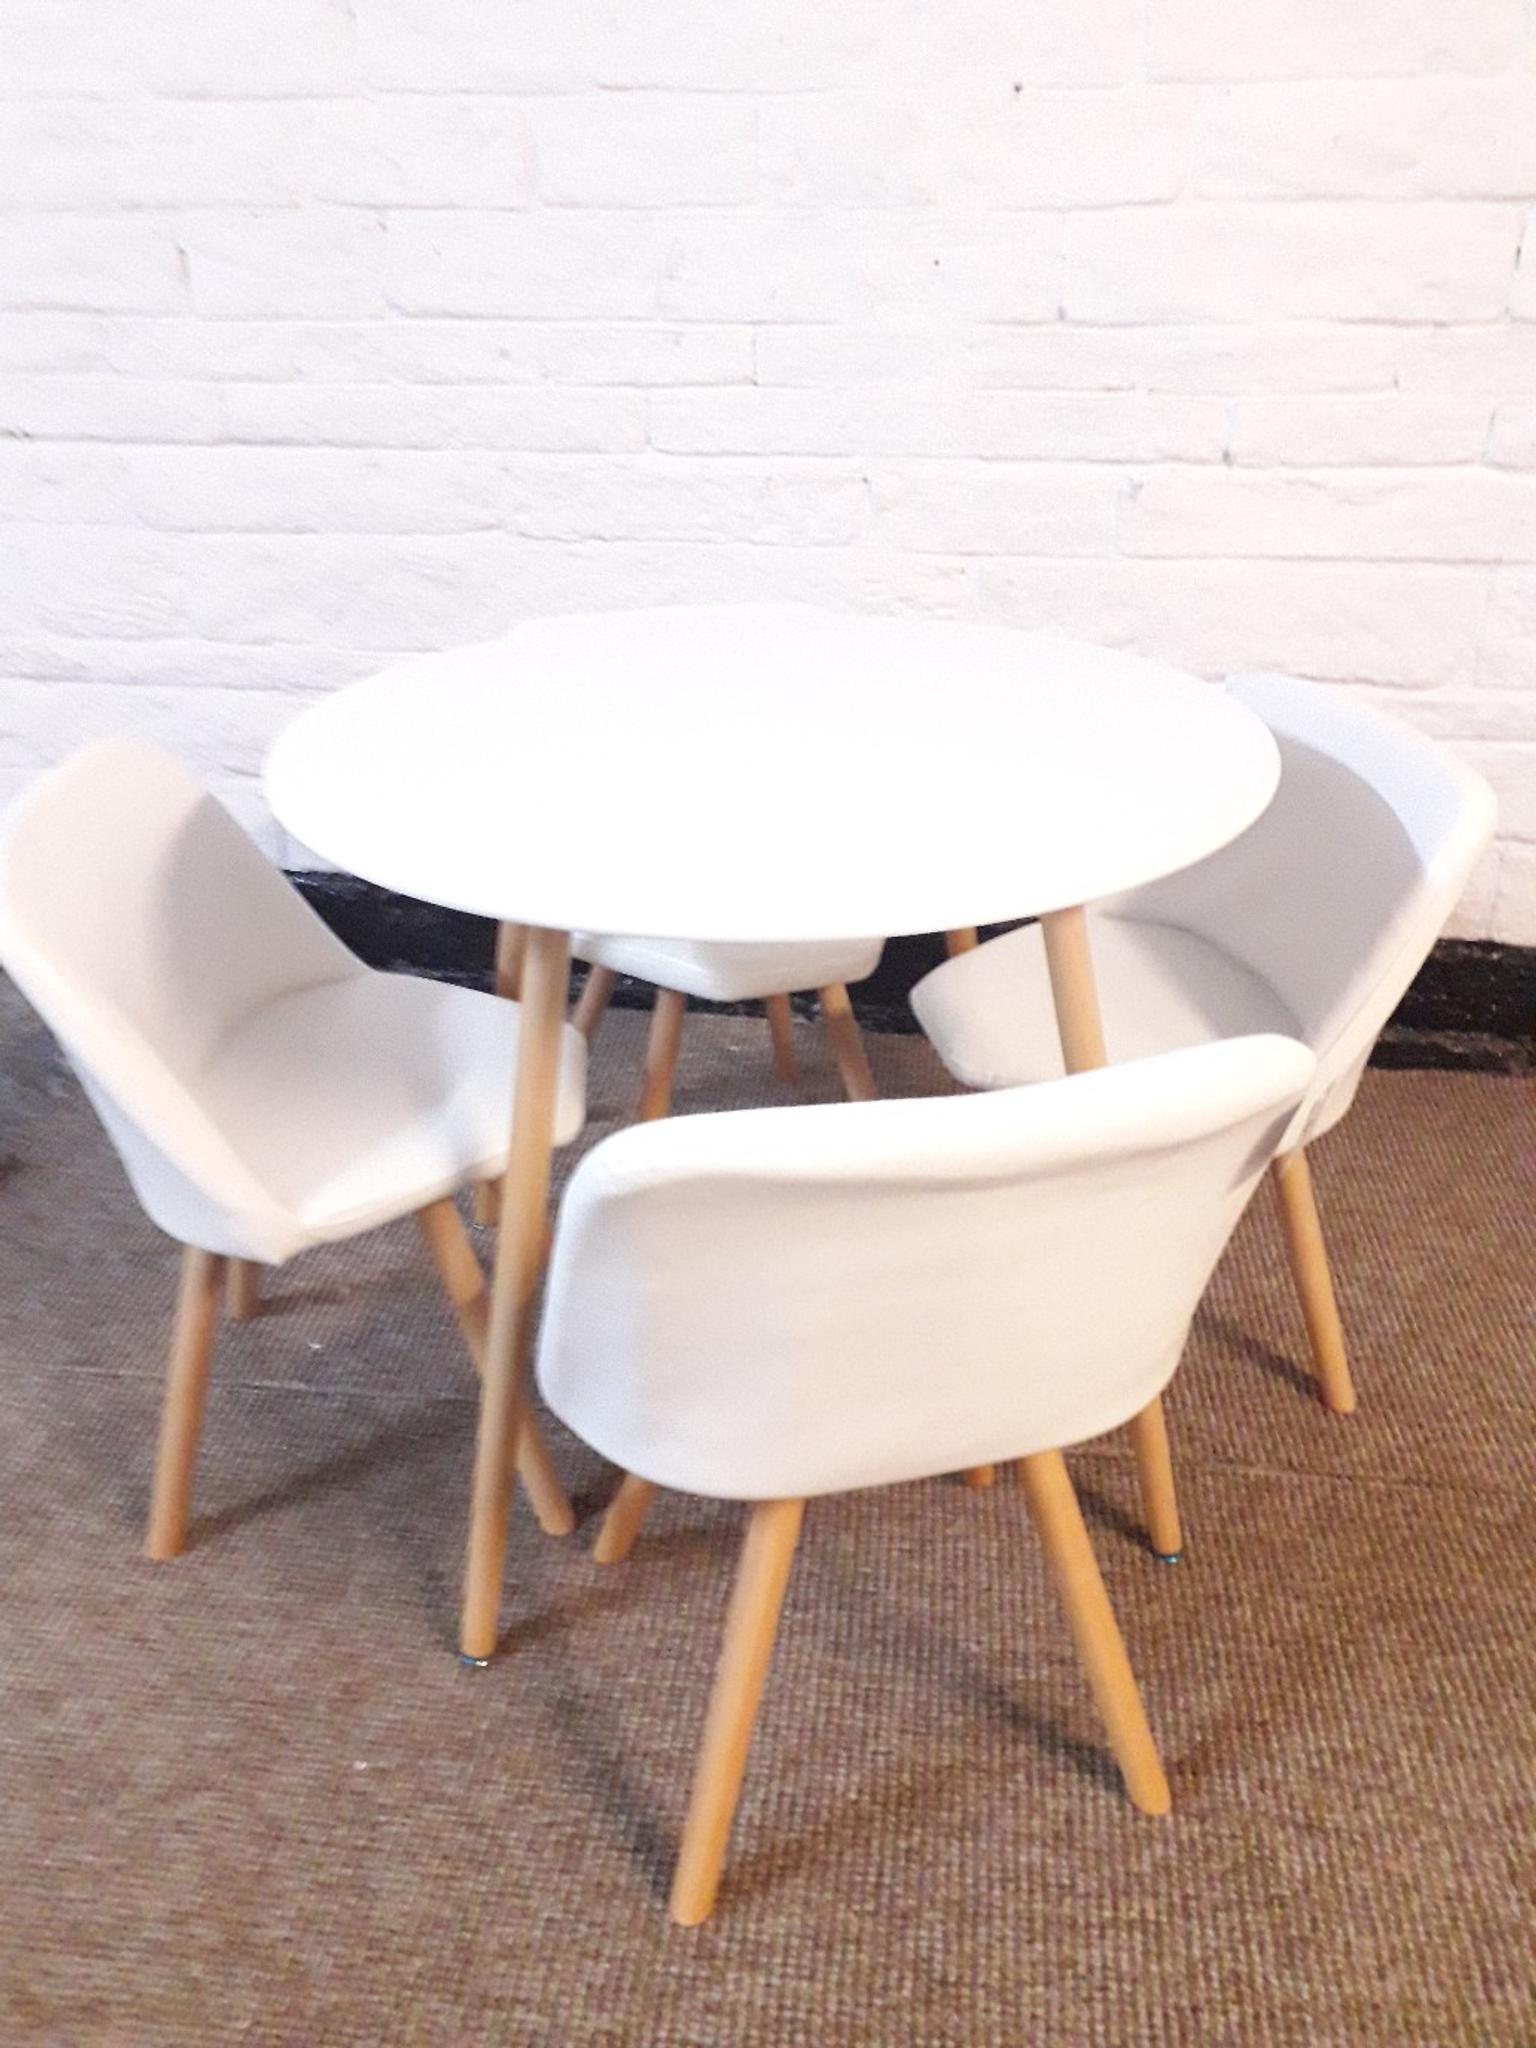 Round Dining Table And 4 Chairs White In Bd7 Bradford Fur 120 00 Zum Verkauf Shpock At